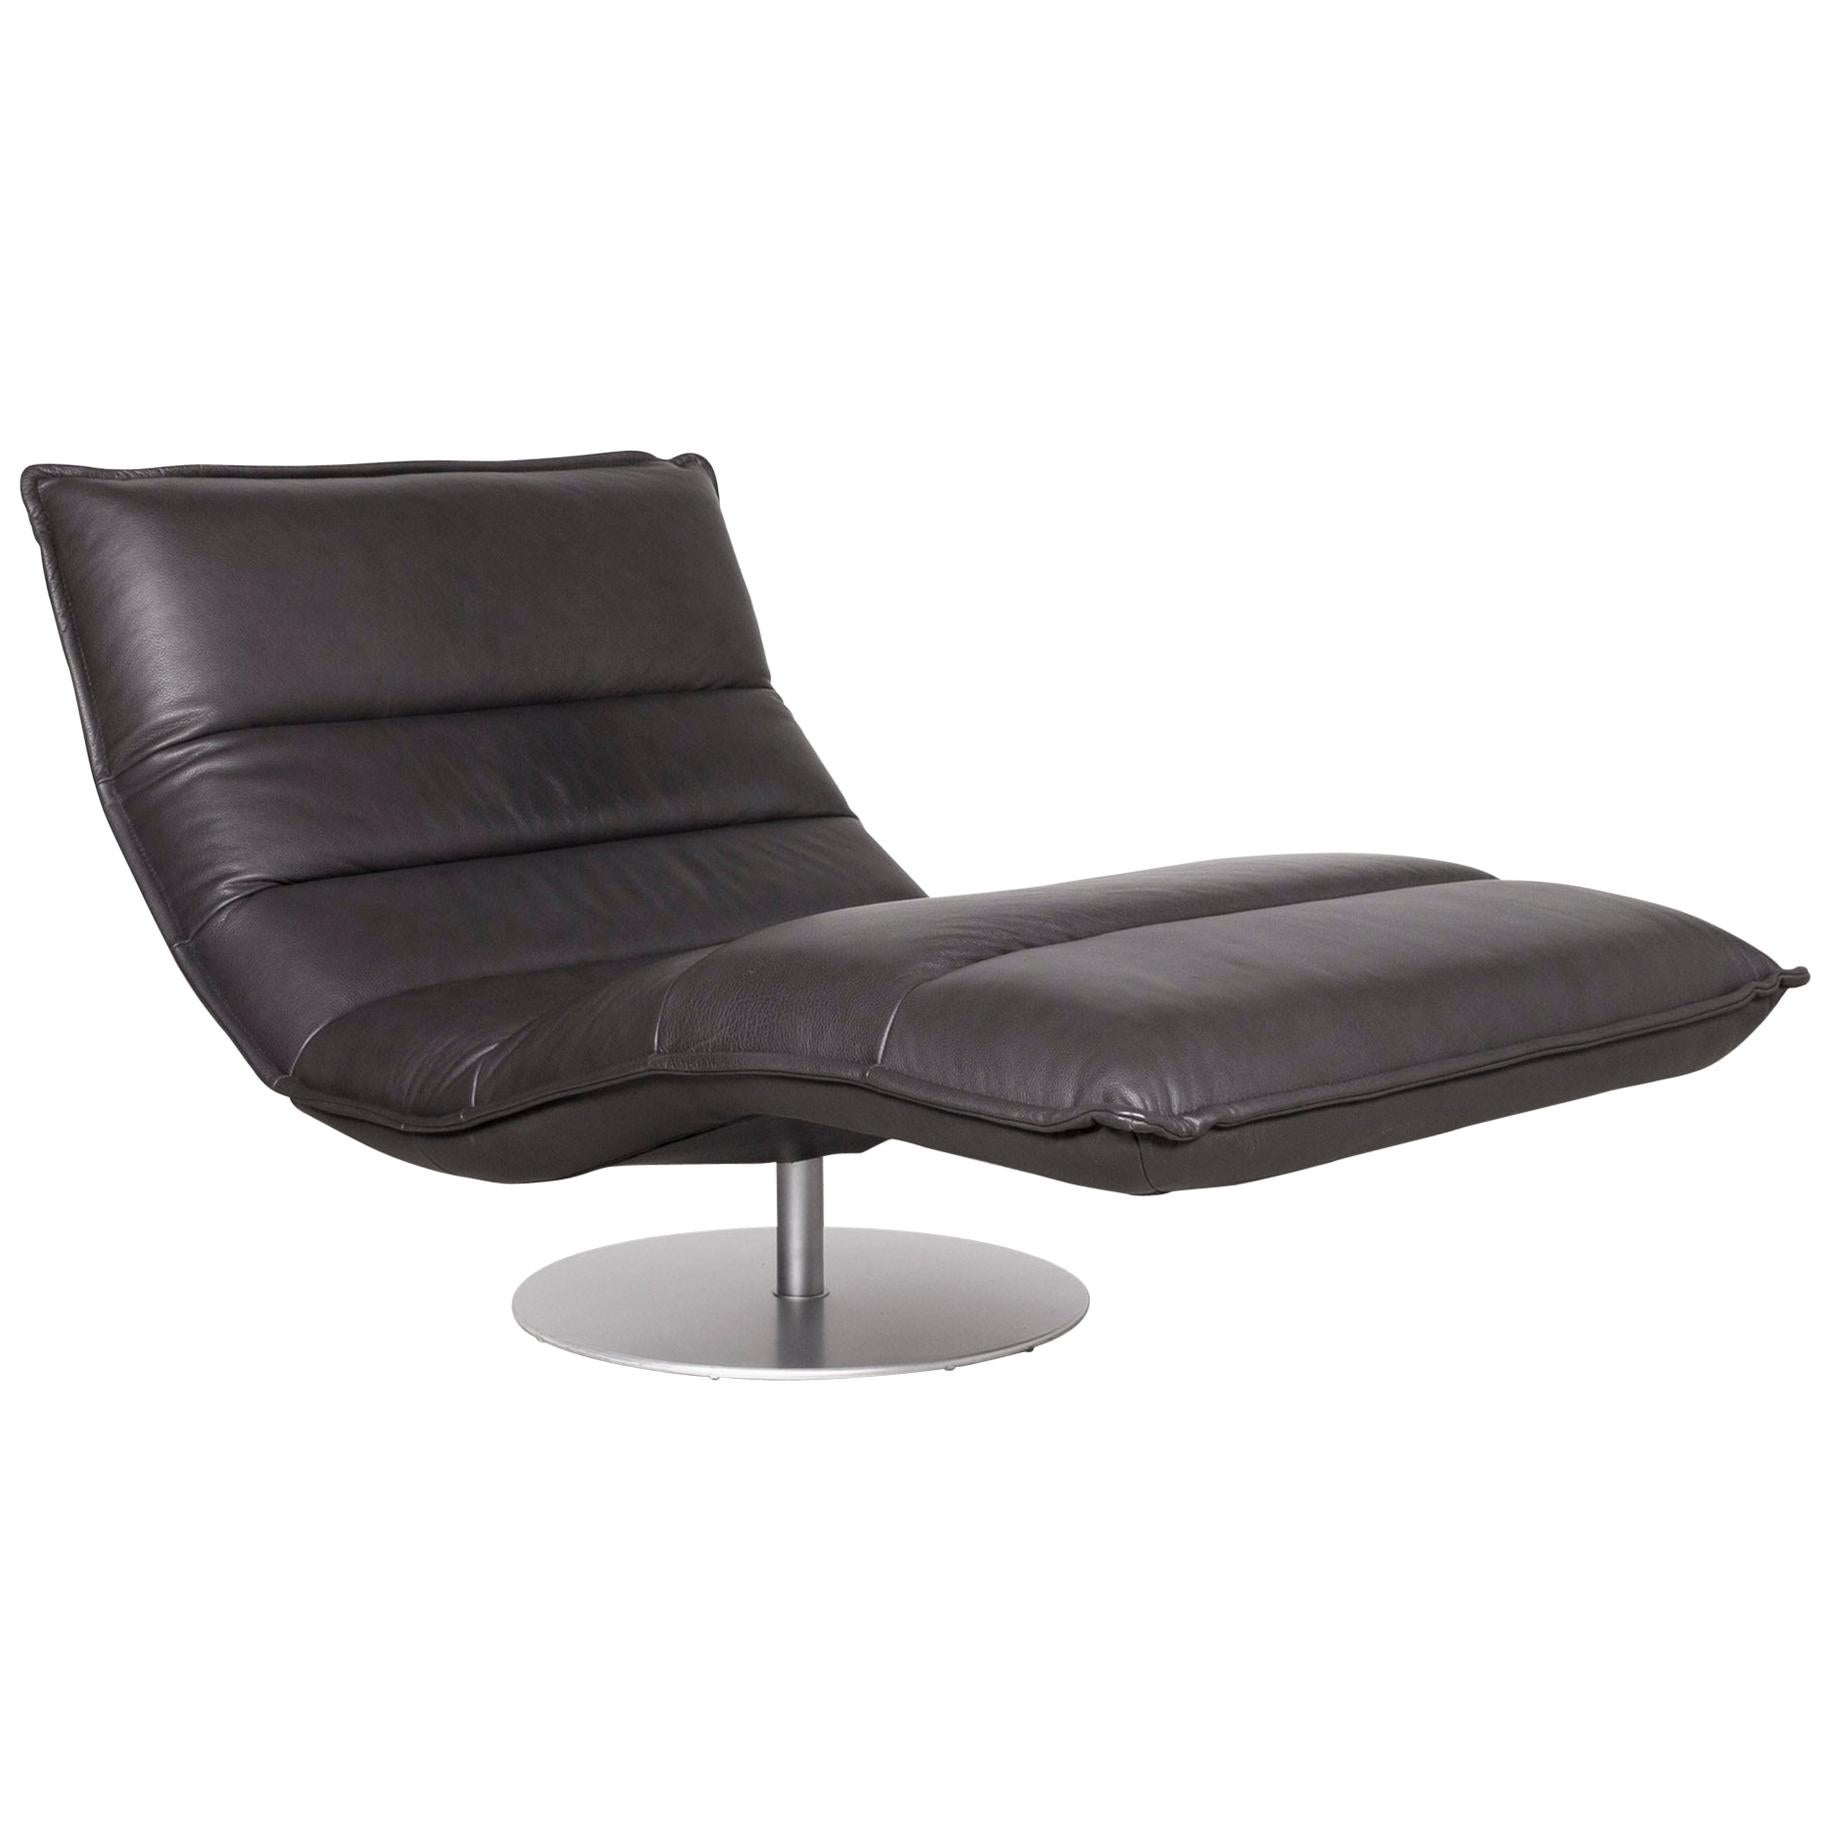 Willi Schillig Inkoognito Leather Lounger Anthracite Genuine Leather For Sale